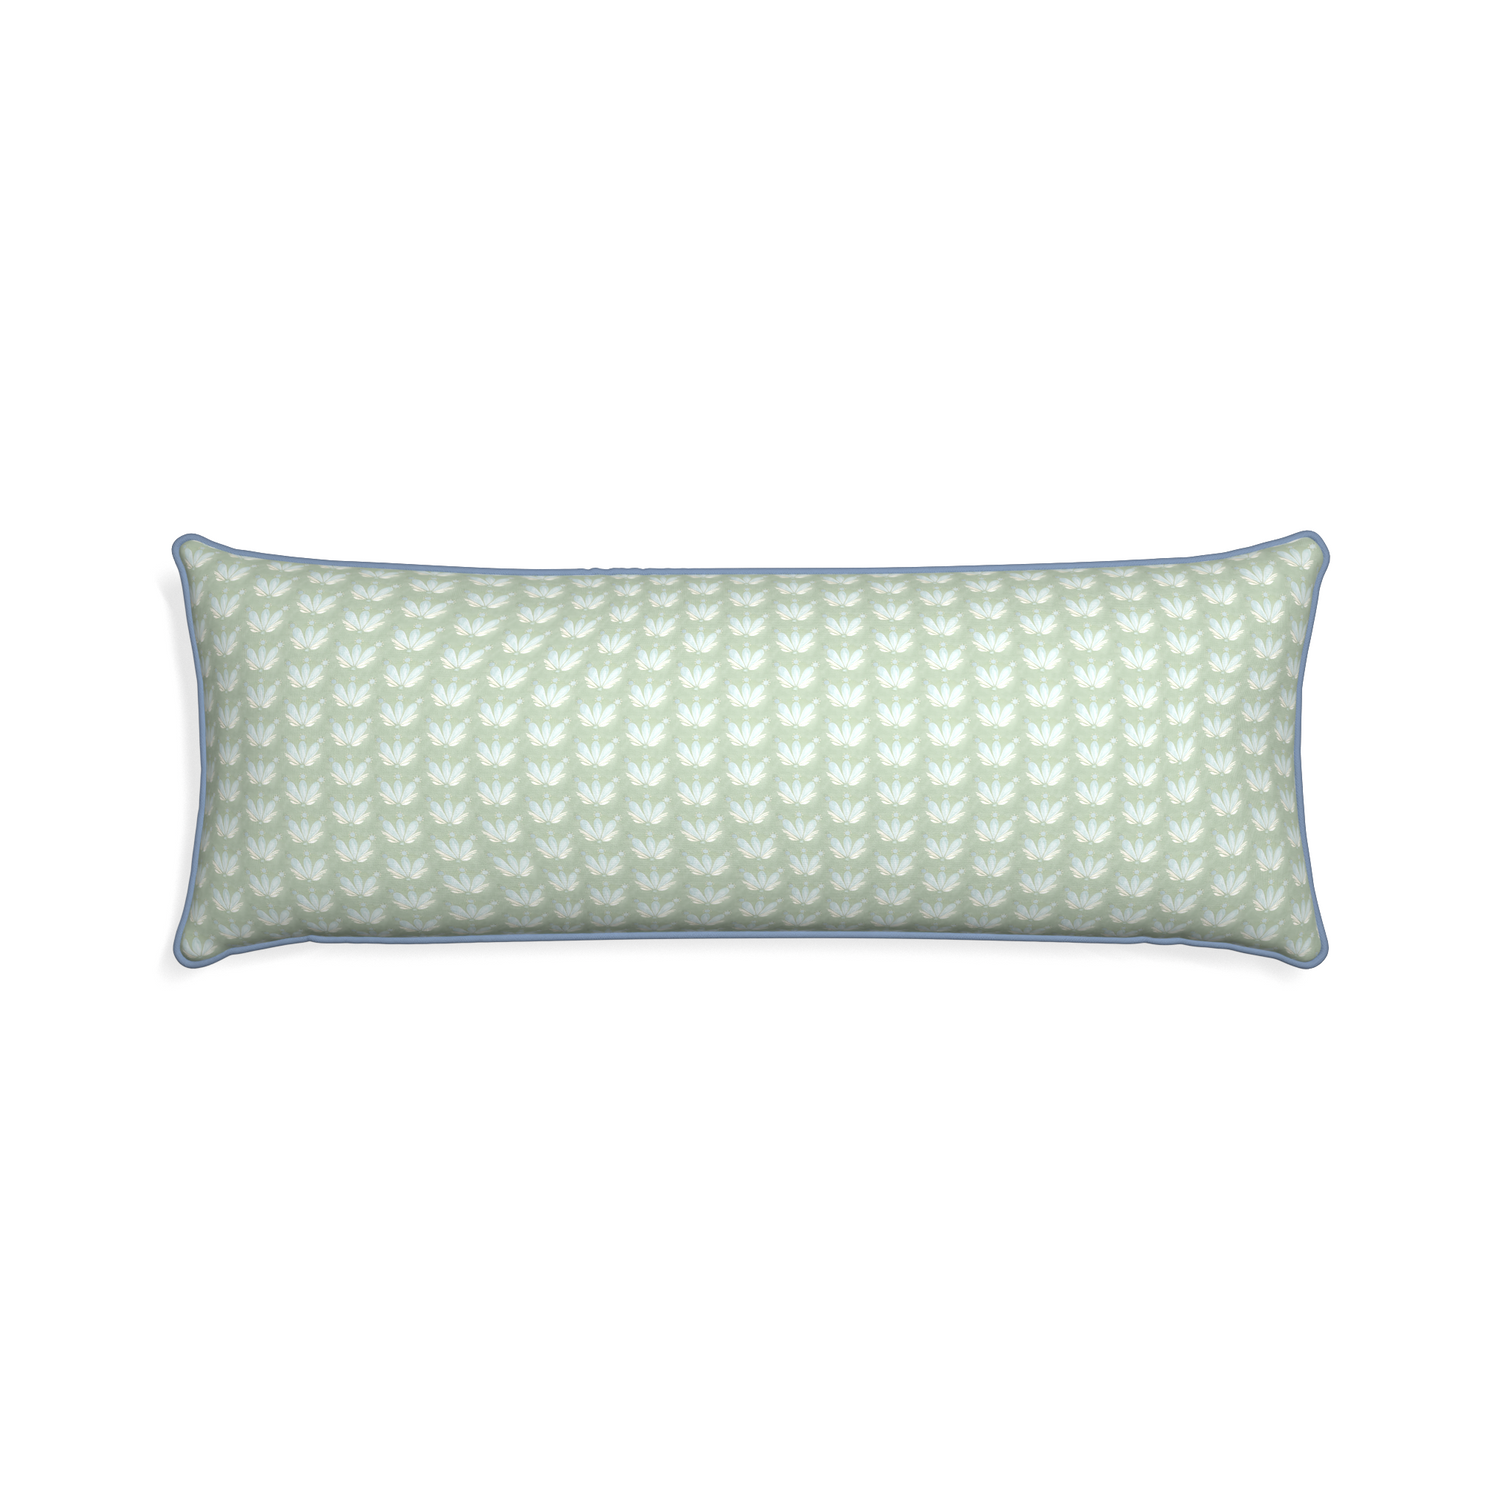 Xl-lumbar serena sea salt custom blue & green floral drop repeatpillow with sky piping on white background